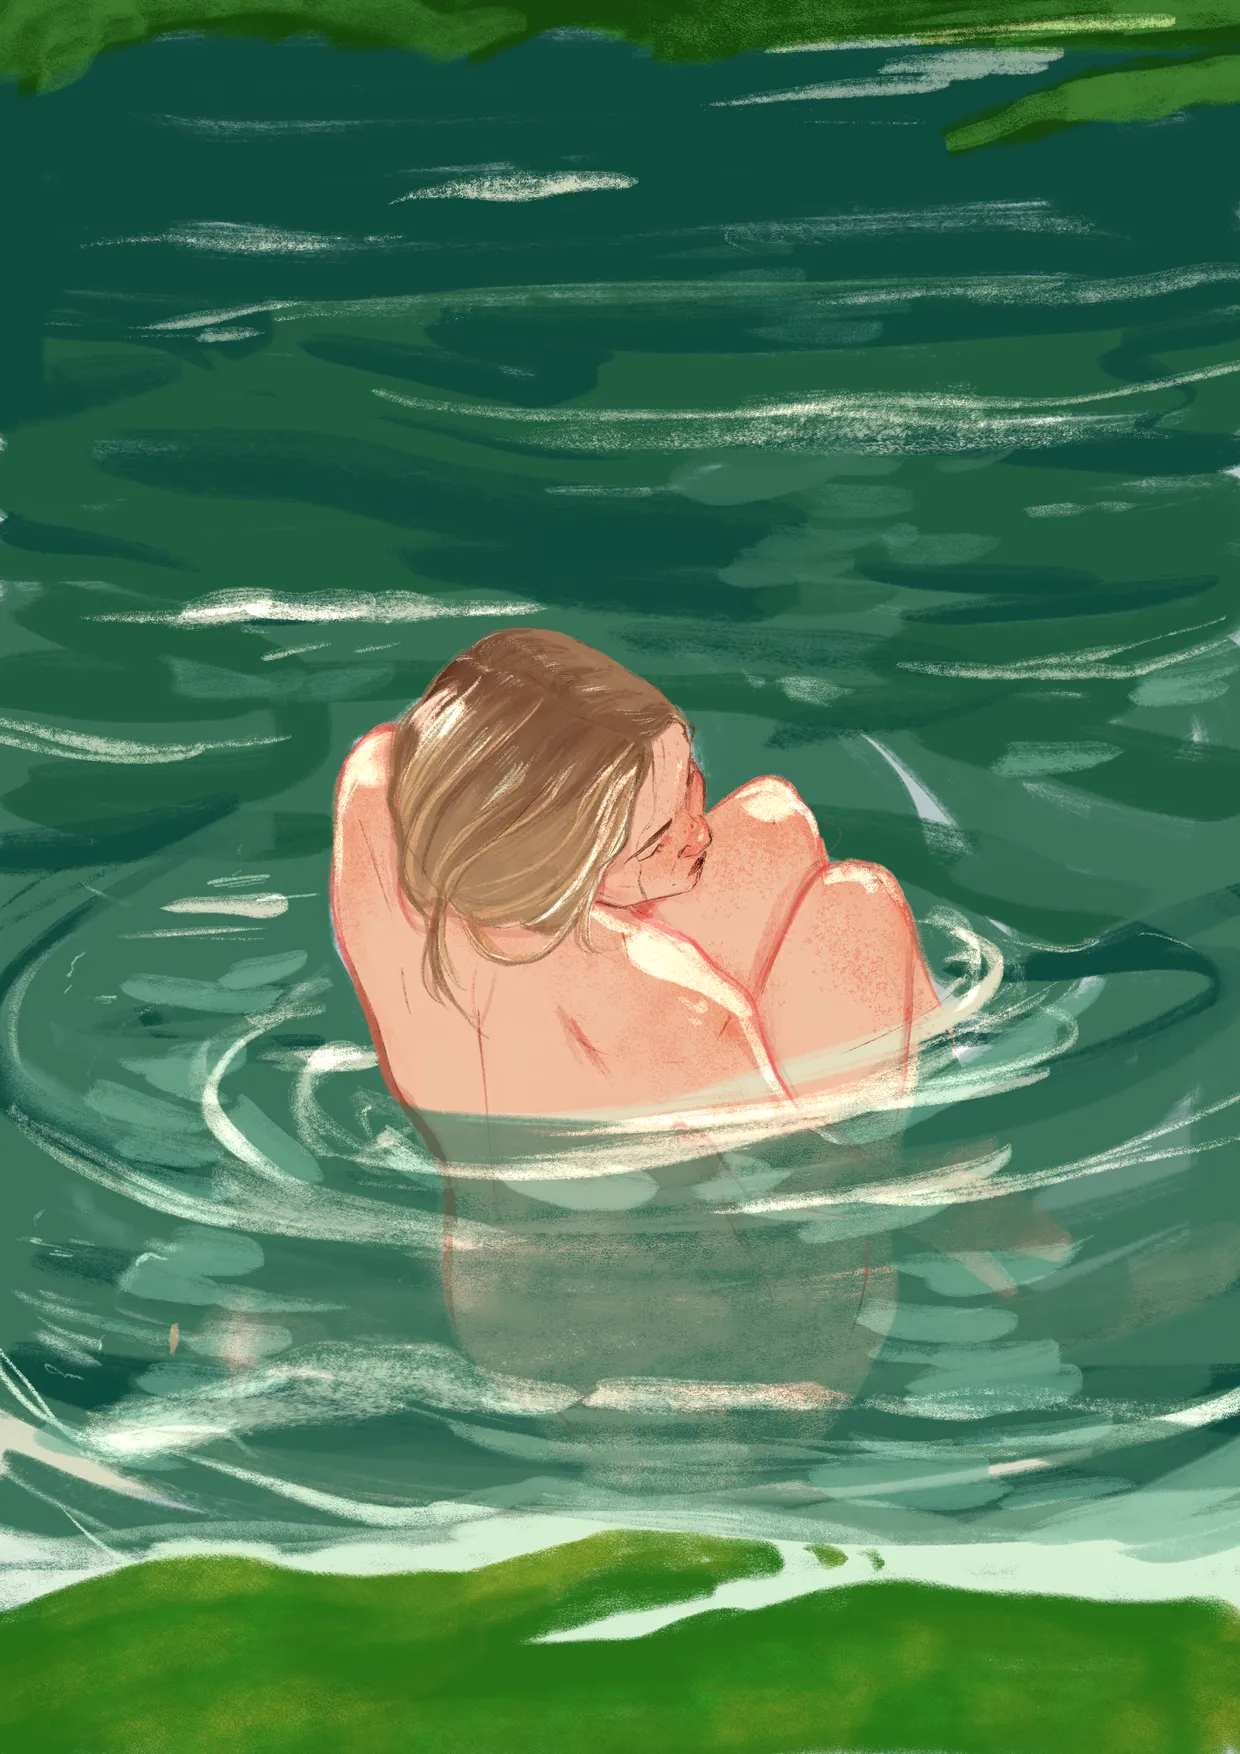 a digital illustration depicting a face of a woman emerging from water in between two lands